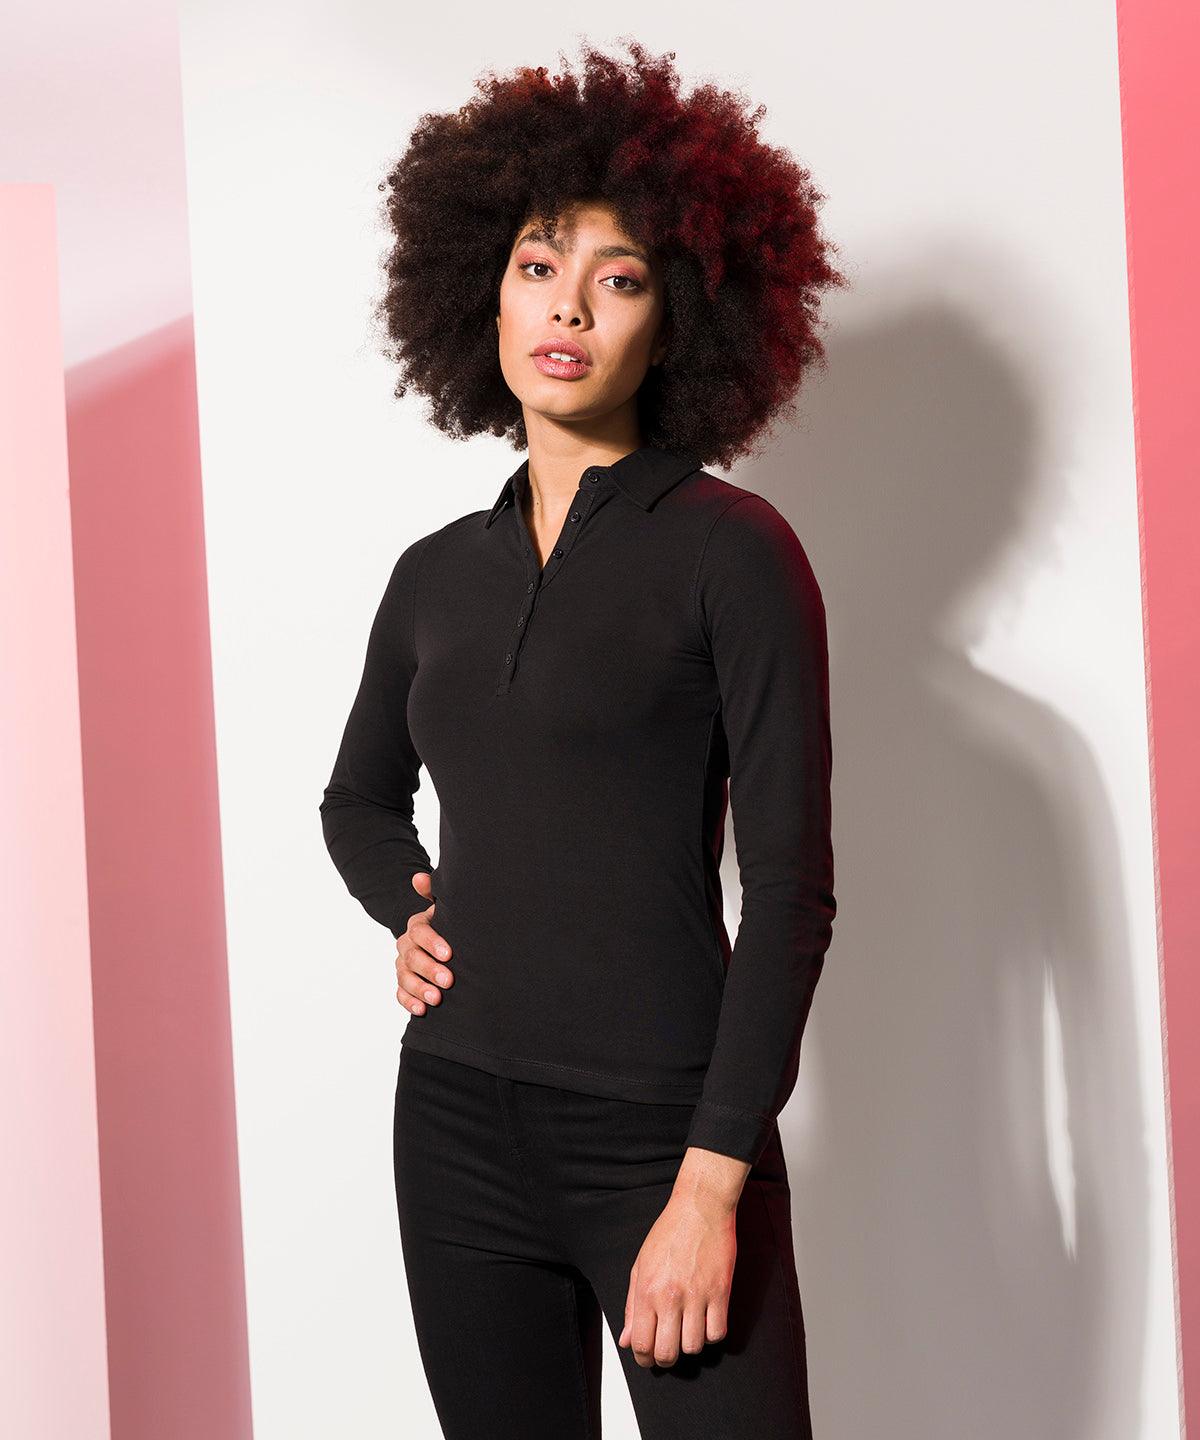 Black - Women's long sleeve stretch polo Polos SF Polos & Casual, Raladeal - Recently Added, Rebrandable, Women's Fashion Schoolwear Centres